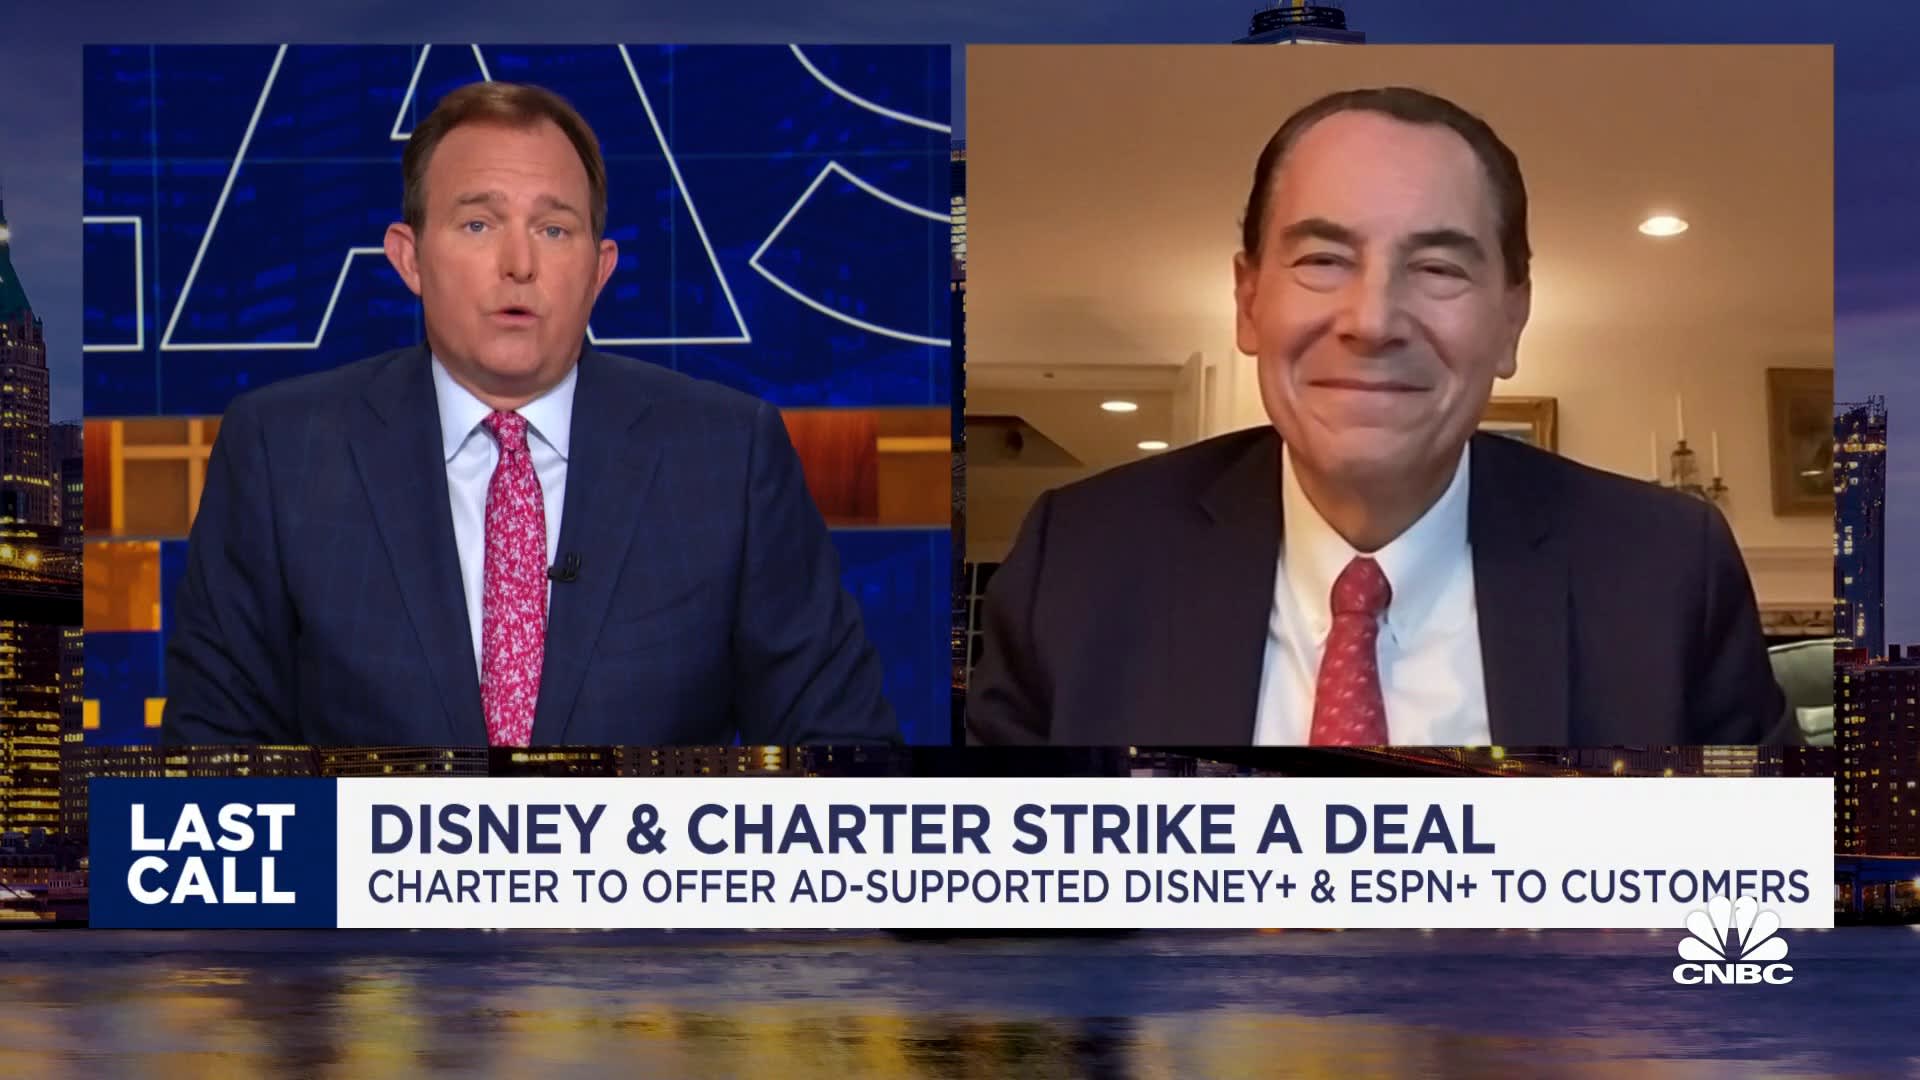 The consumer is ultimately the winner in the Disney-Charter deal, says media mogul Tom Rogers